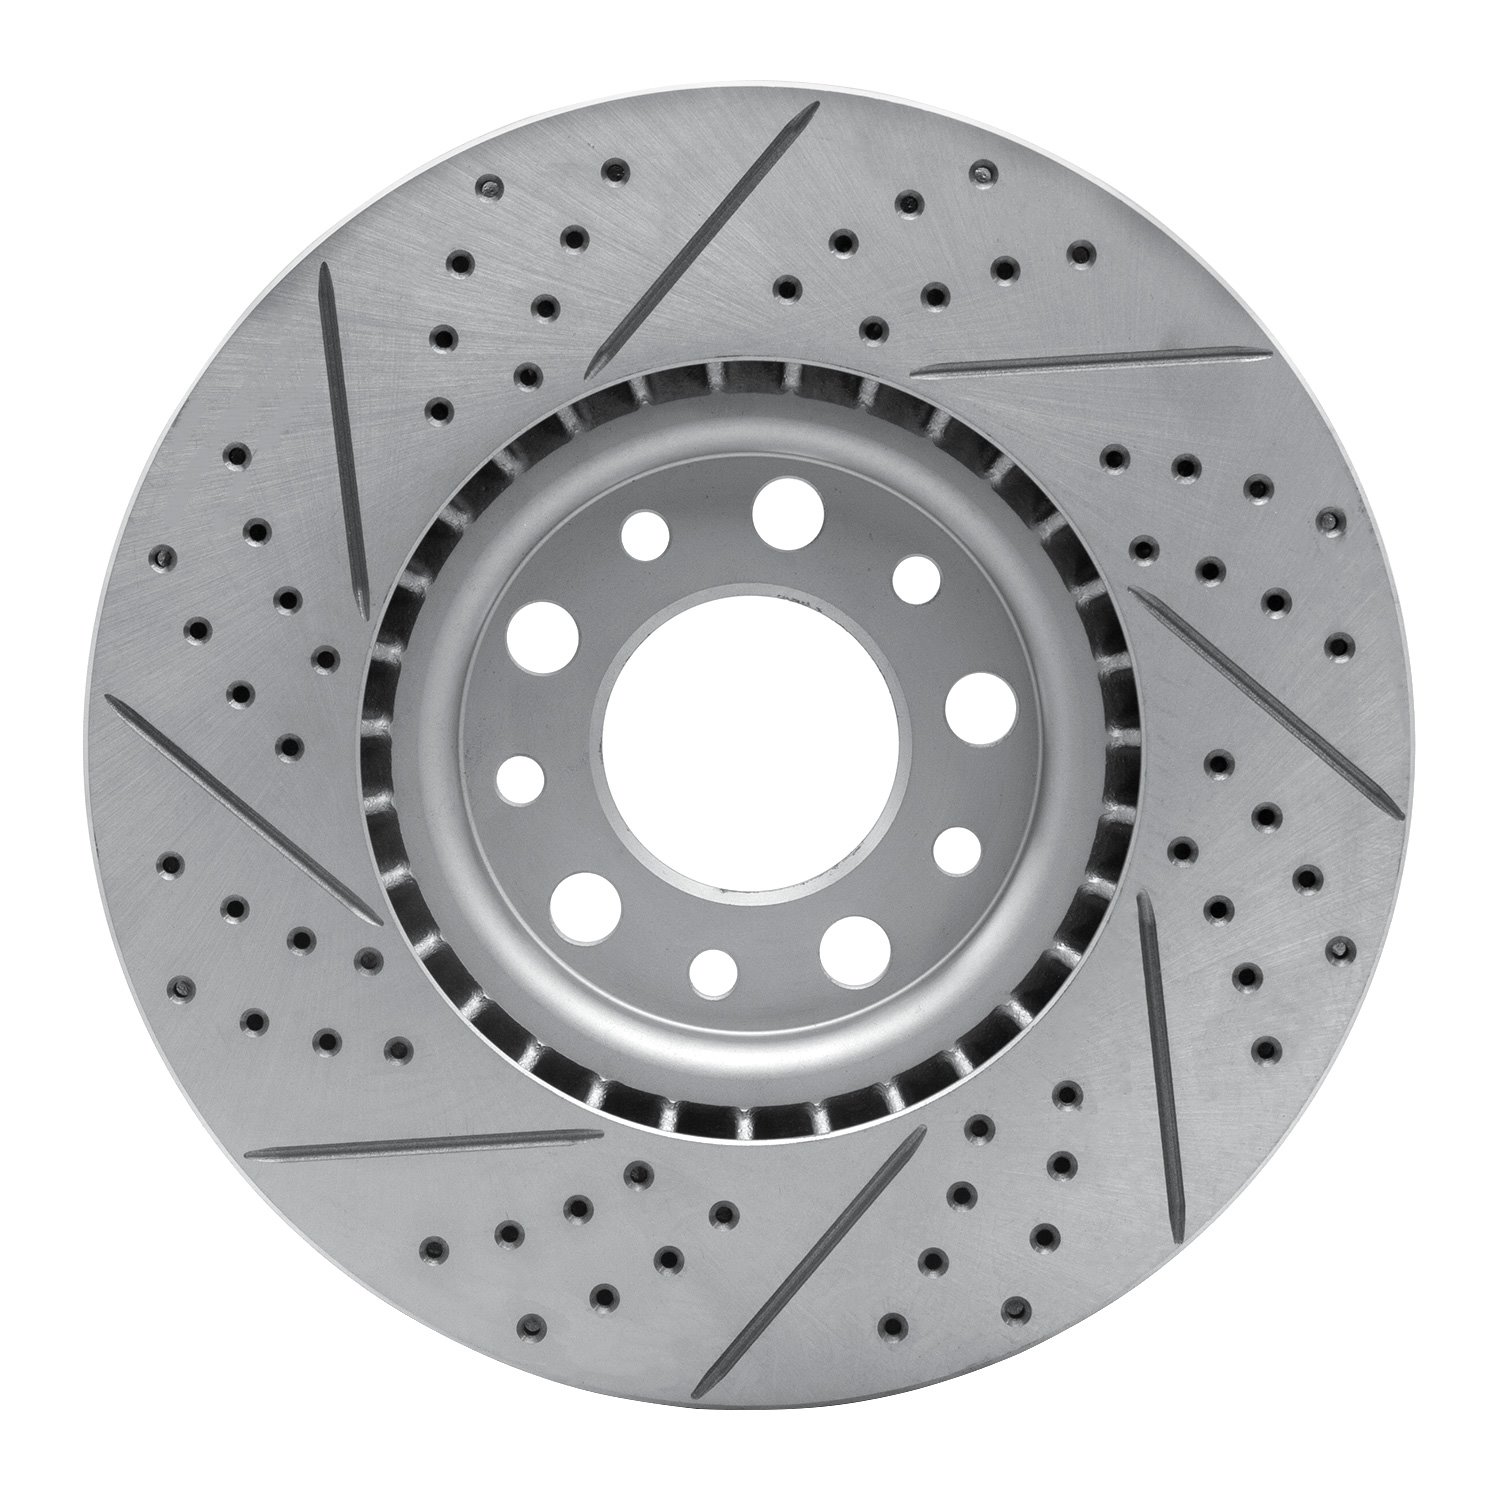 830-39025R Geoperformance Drilled/Slotted Brake Rotor, Fits Select Mopar, Position: Front Right